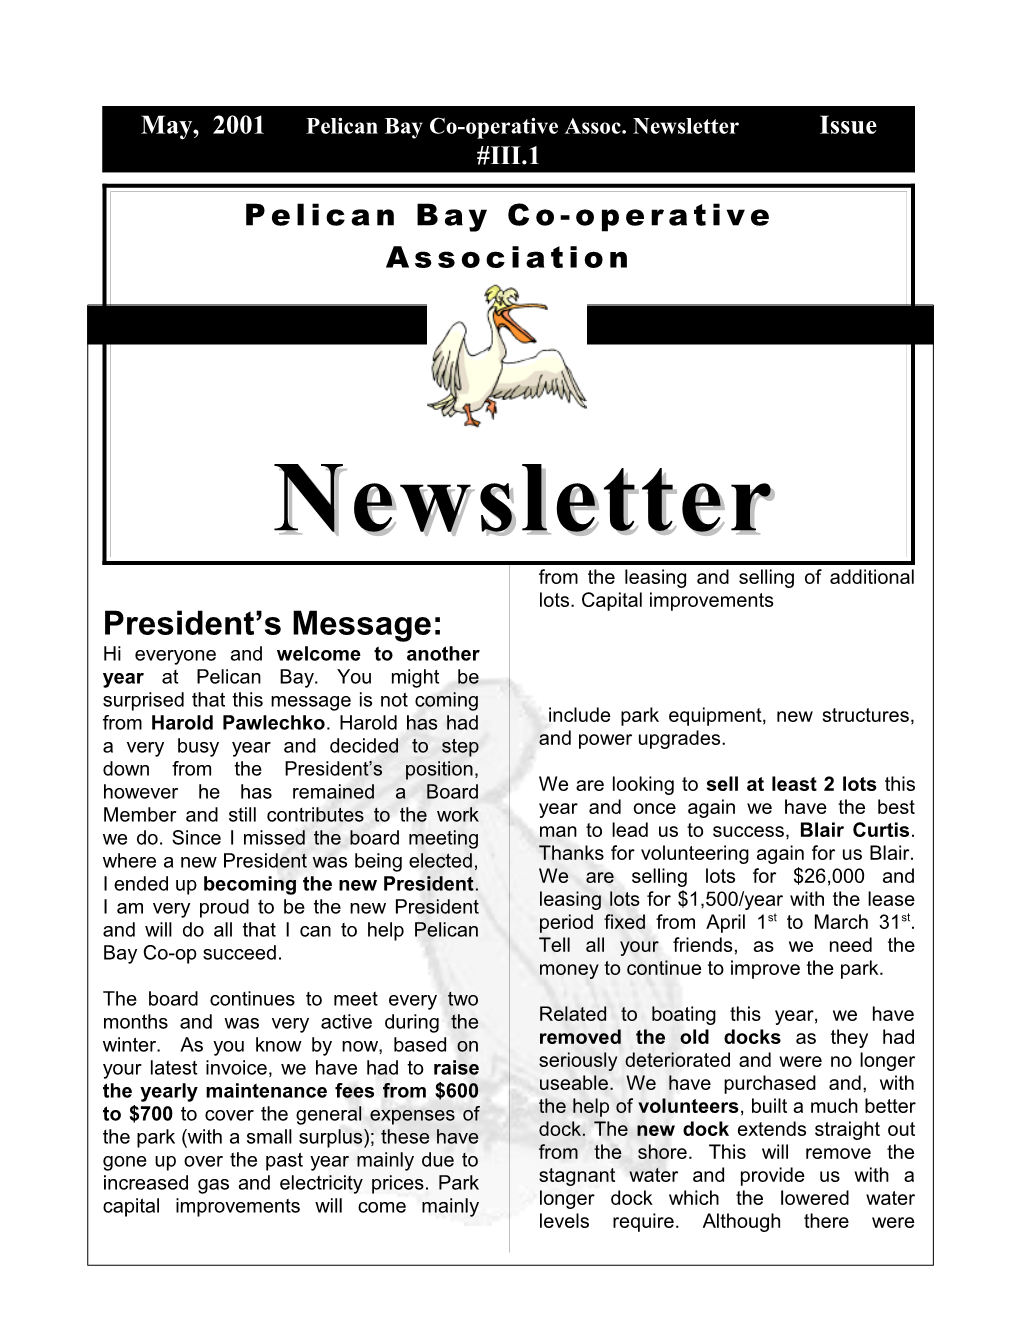 May, 2001 Pelican Bay Co-Operative Assoc. Newsletter Issue #III.1